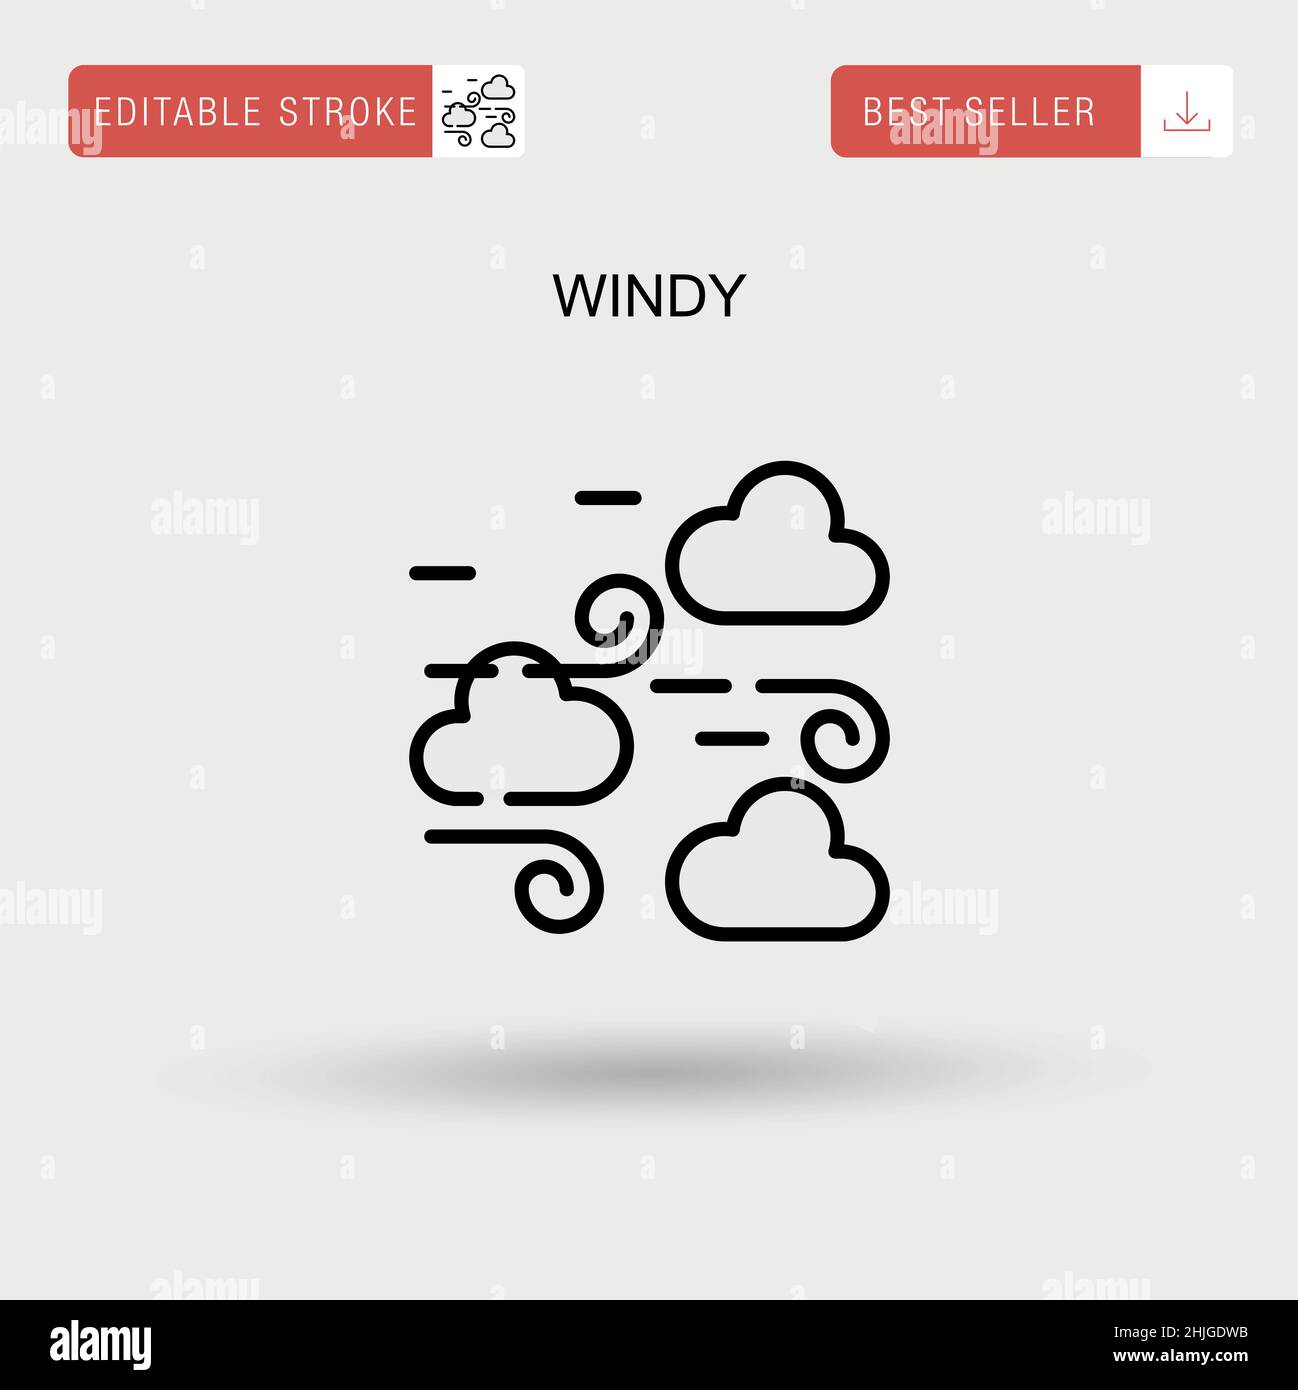 125,490 Windy Day Images, Stock Photos, 3D objects, & Vectors